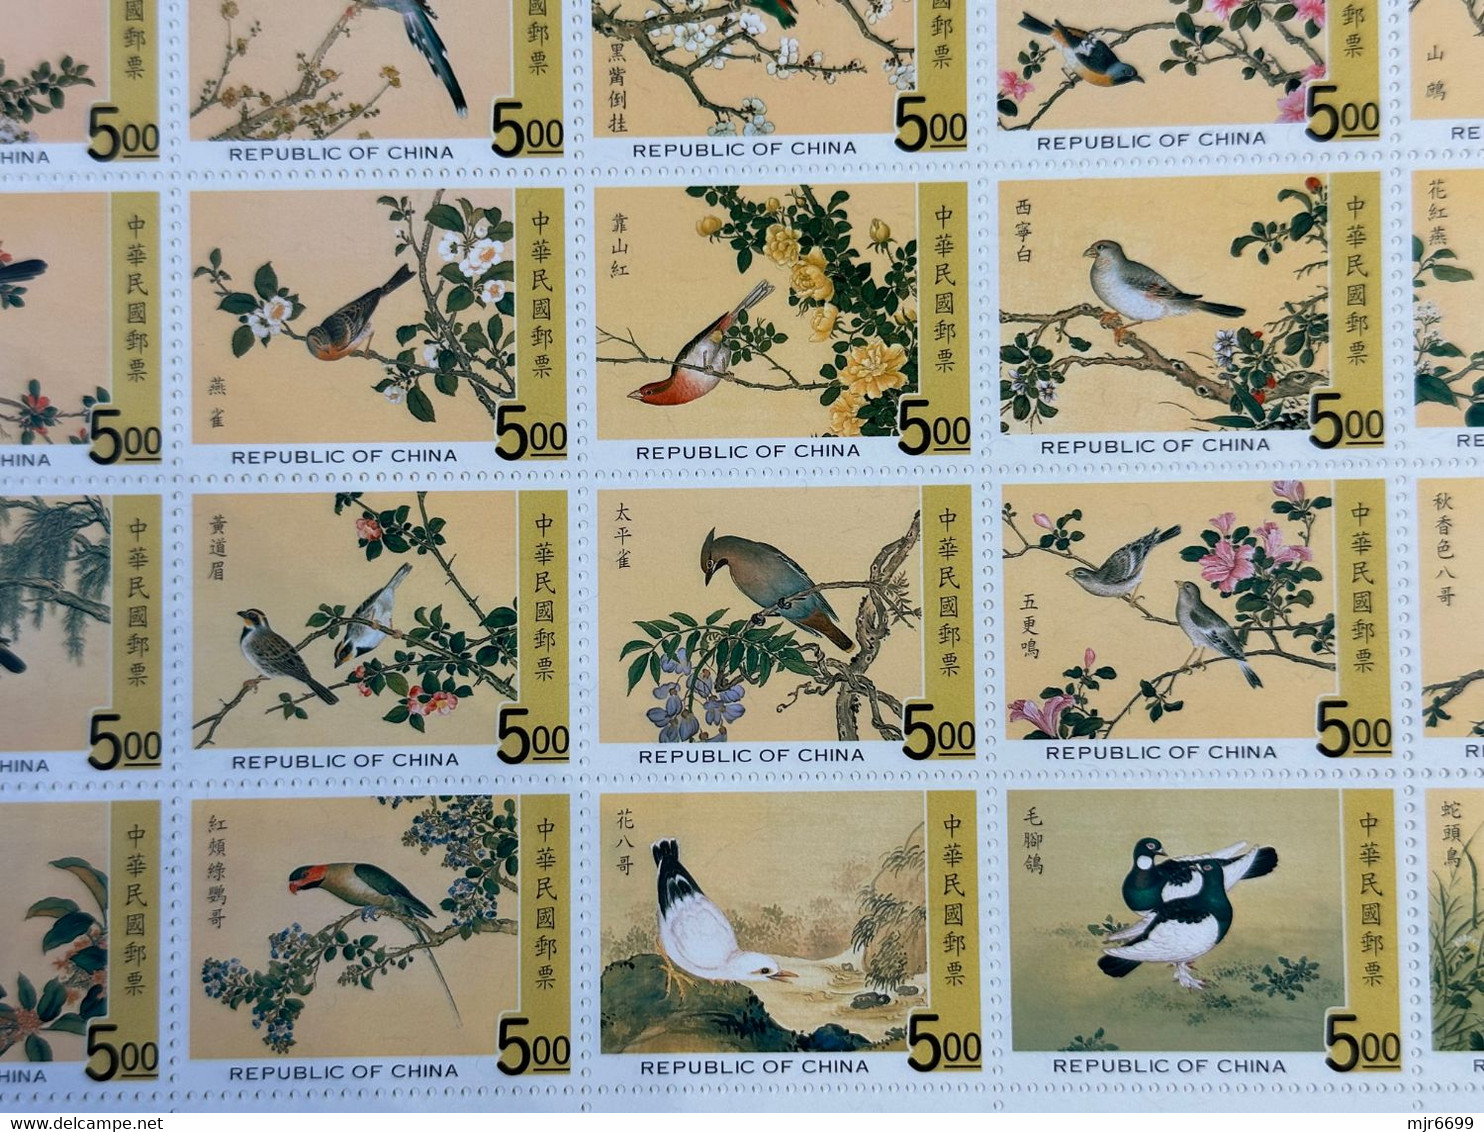 REPUBLIC OF CHINA/TAIWAN FAMOUS PAINTING OF BIRDS SET OF 25 IN SHEET UM MINT VERY FINE - Lots & Serien